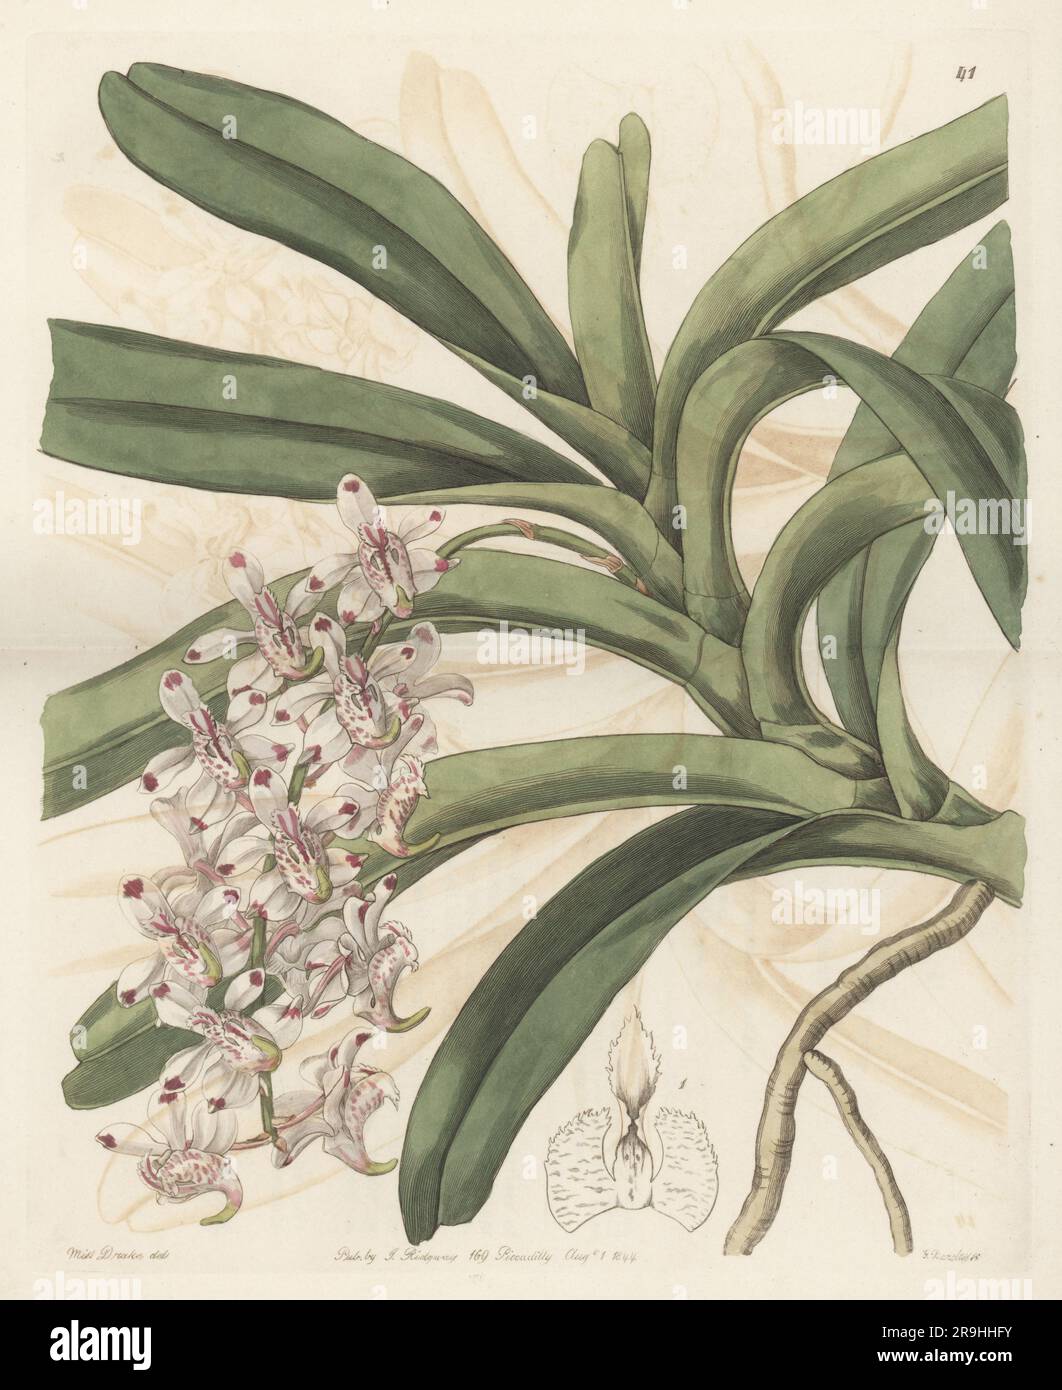 Aerides odorata orchid, endangered. Native to Southeast Asia and China. Imported from Java and flowered at George Loddiges' nursery. Green-leaved air plant, Aerides virens. Handcoloured copperplate engraving by George Barclay after a botanical illustration by Sarah Drake from Edwards’ Botanical Register, continued by John Lindley, published by James Ridgway, London, 1844. Stock Photo